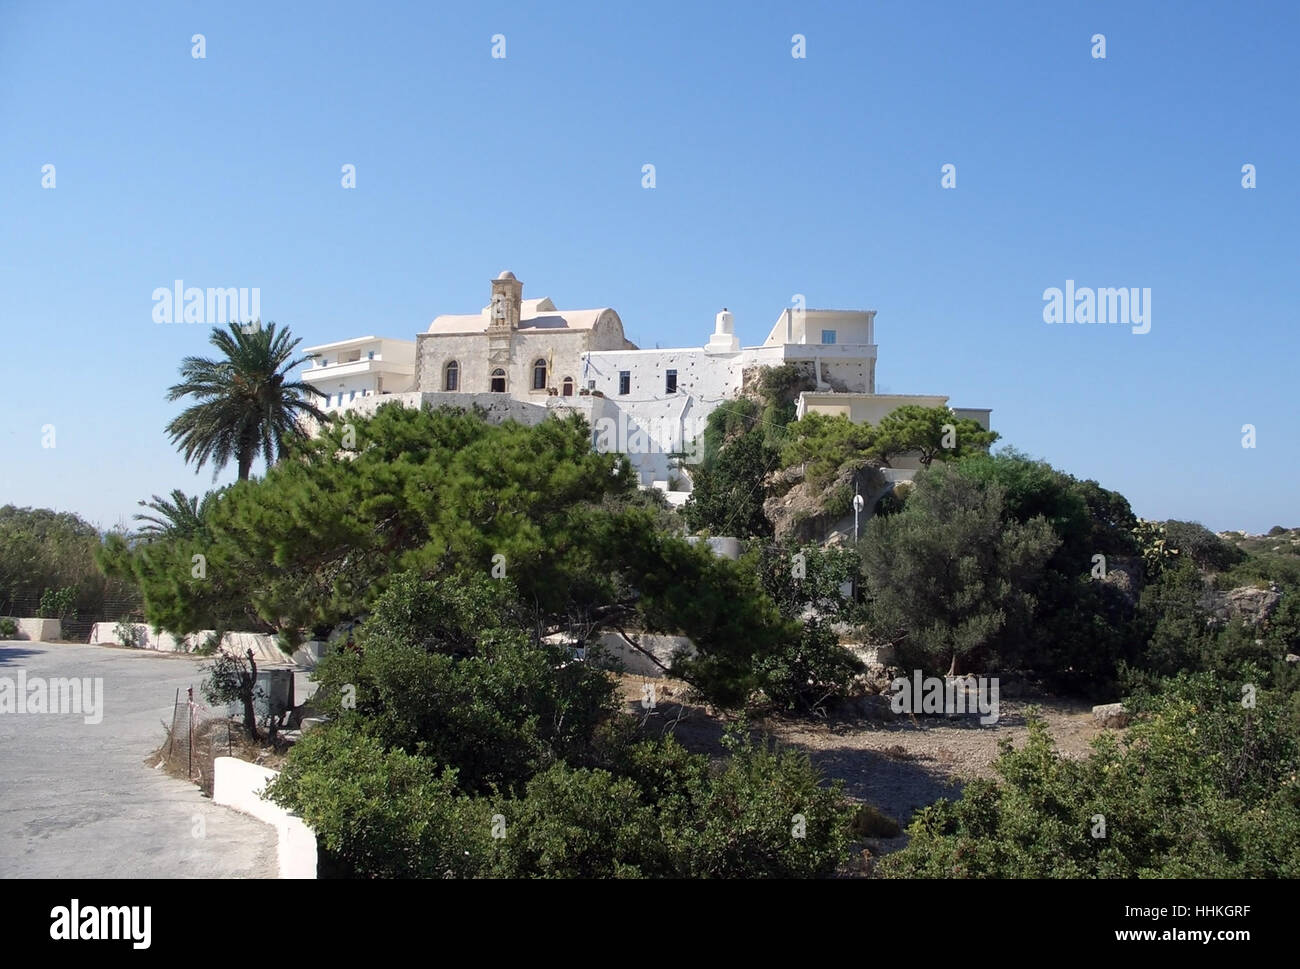 pictoral scenery with the Cloister Hrissoskalitissa at Crete (Greece) on a bright summer day Stock Photo